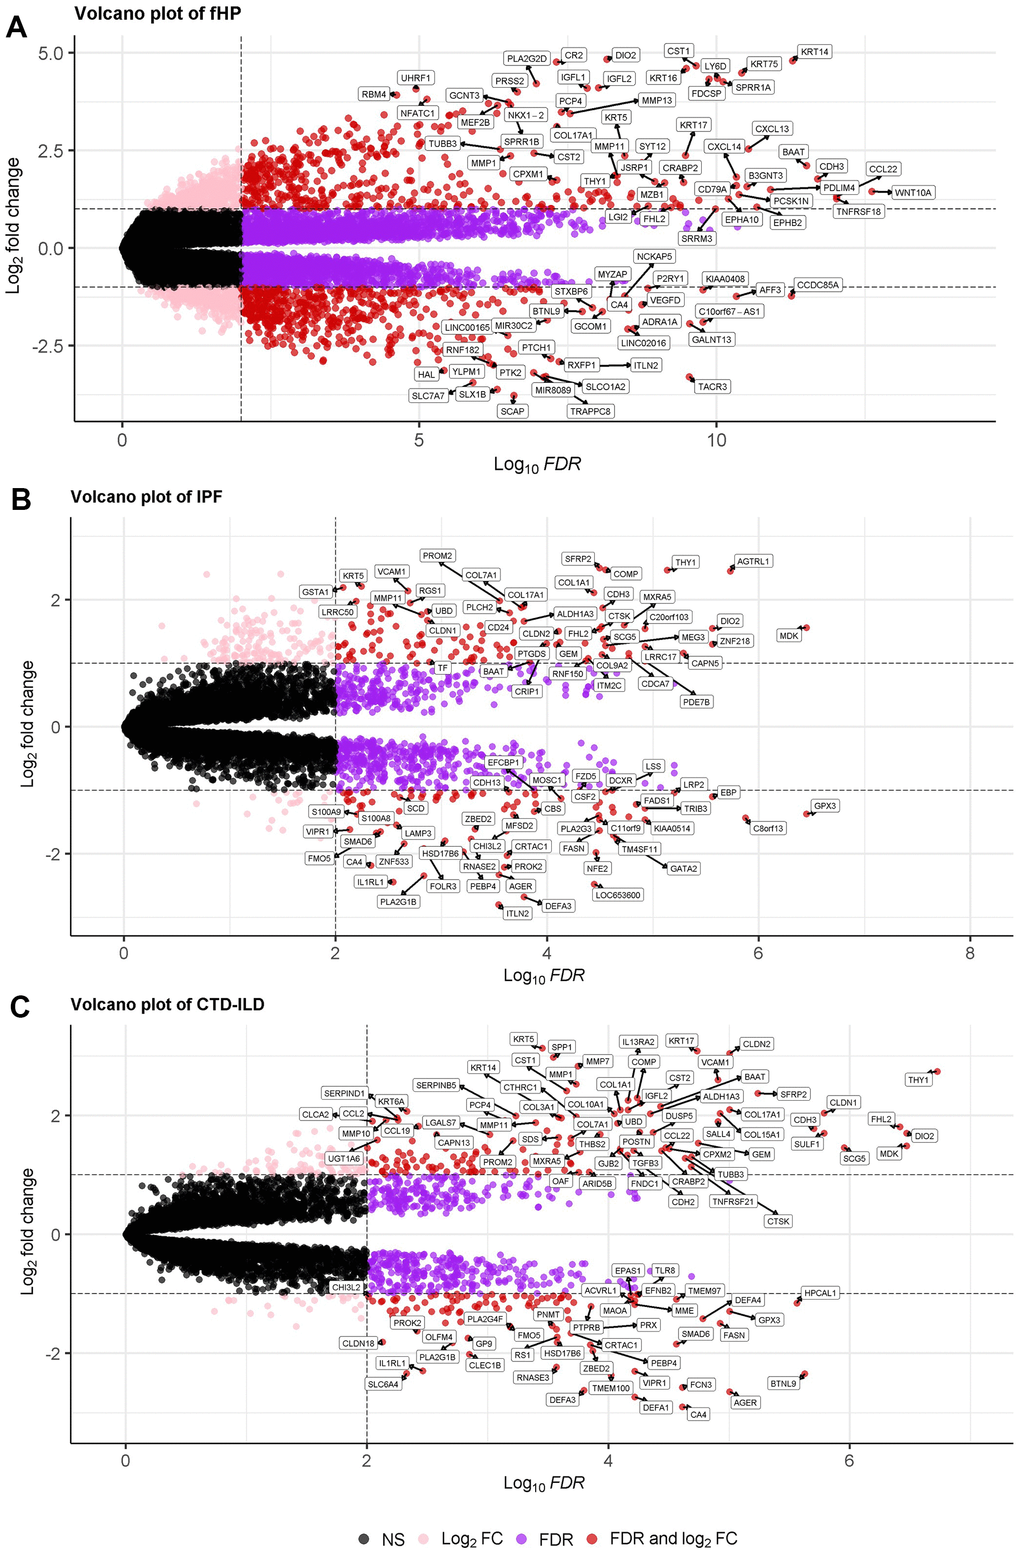 (A–C) Volcano plot demonstrating an overview of the differential expression of all genes in fHP, IPF and CTD-ILD. The threshold in the volcano plot was -log10 adjusted P>2 and |log2 fold change| >0.5; red dots indicate significant differential expressed genes. Note: CTD-ILD expression matrix was the mergence of SSc-ILD and RA-ILD datasets.